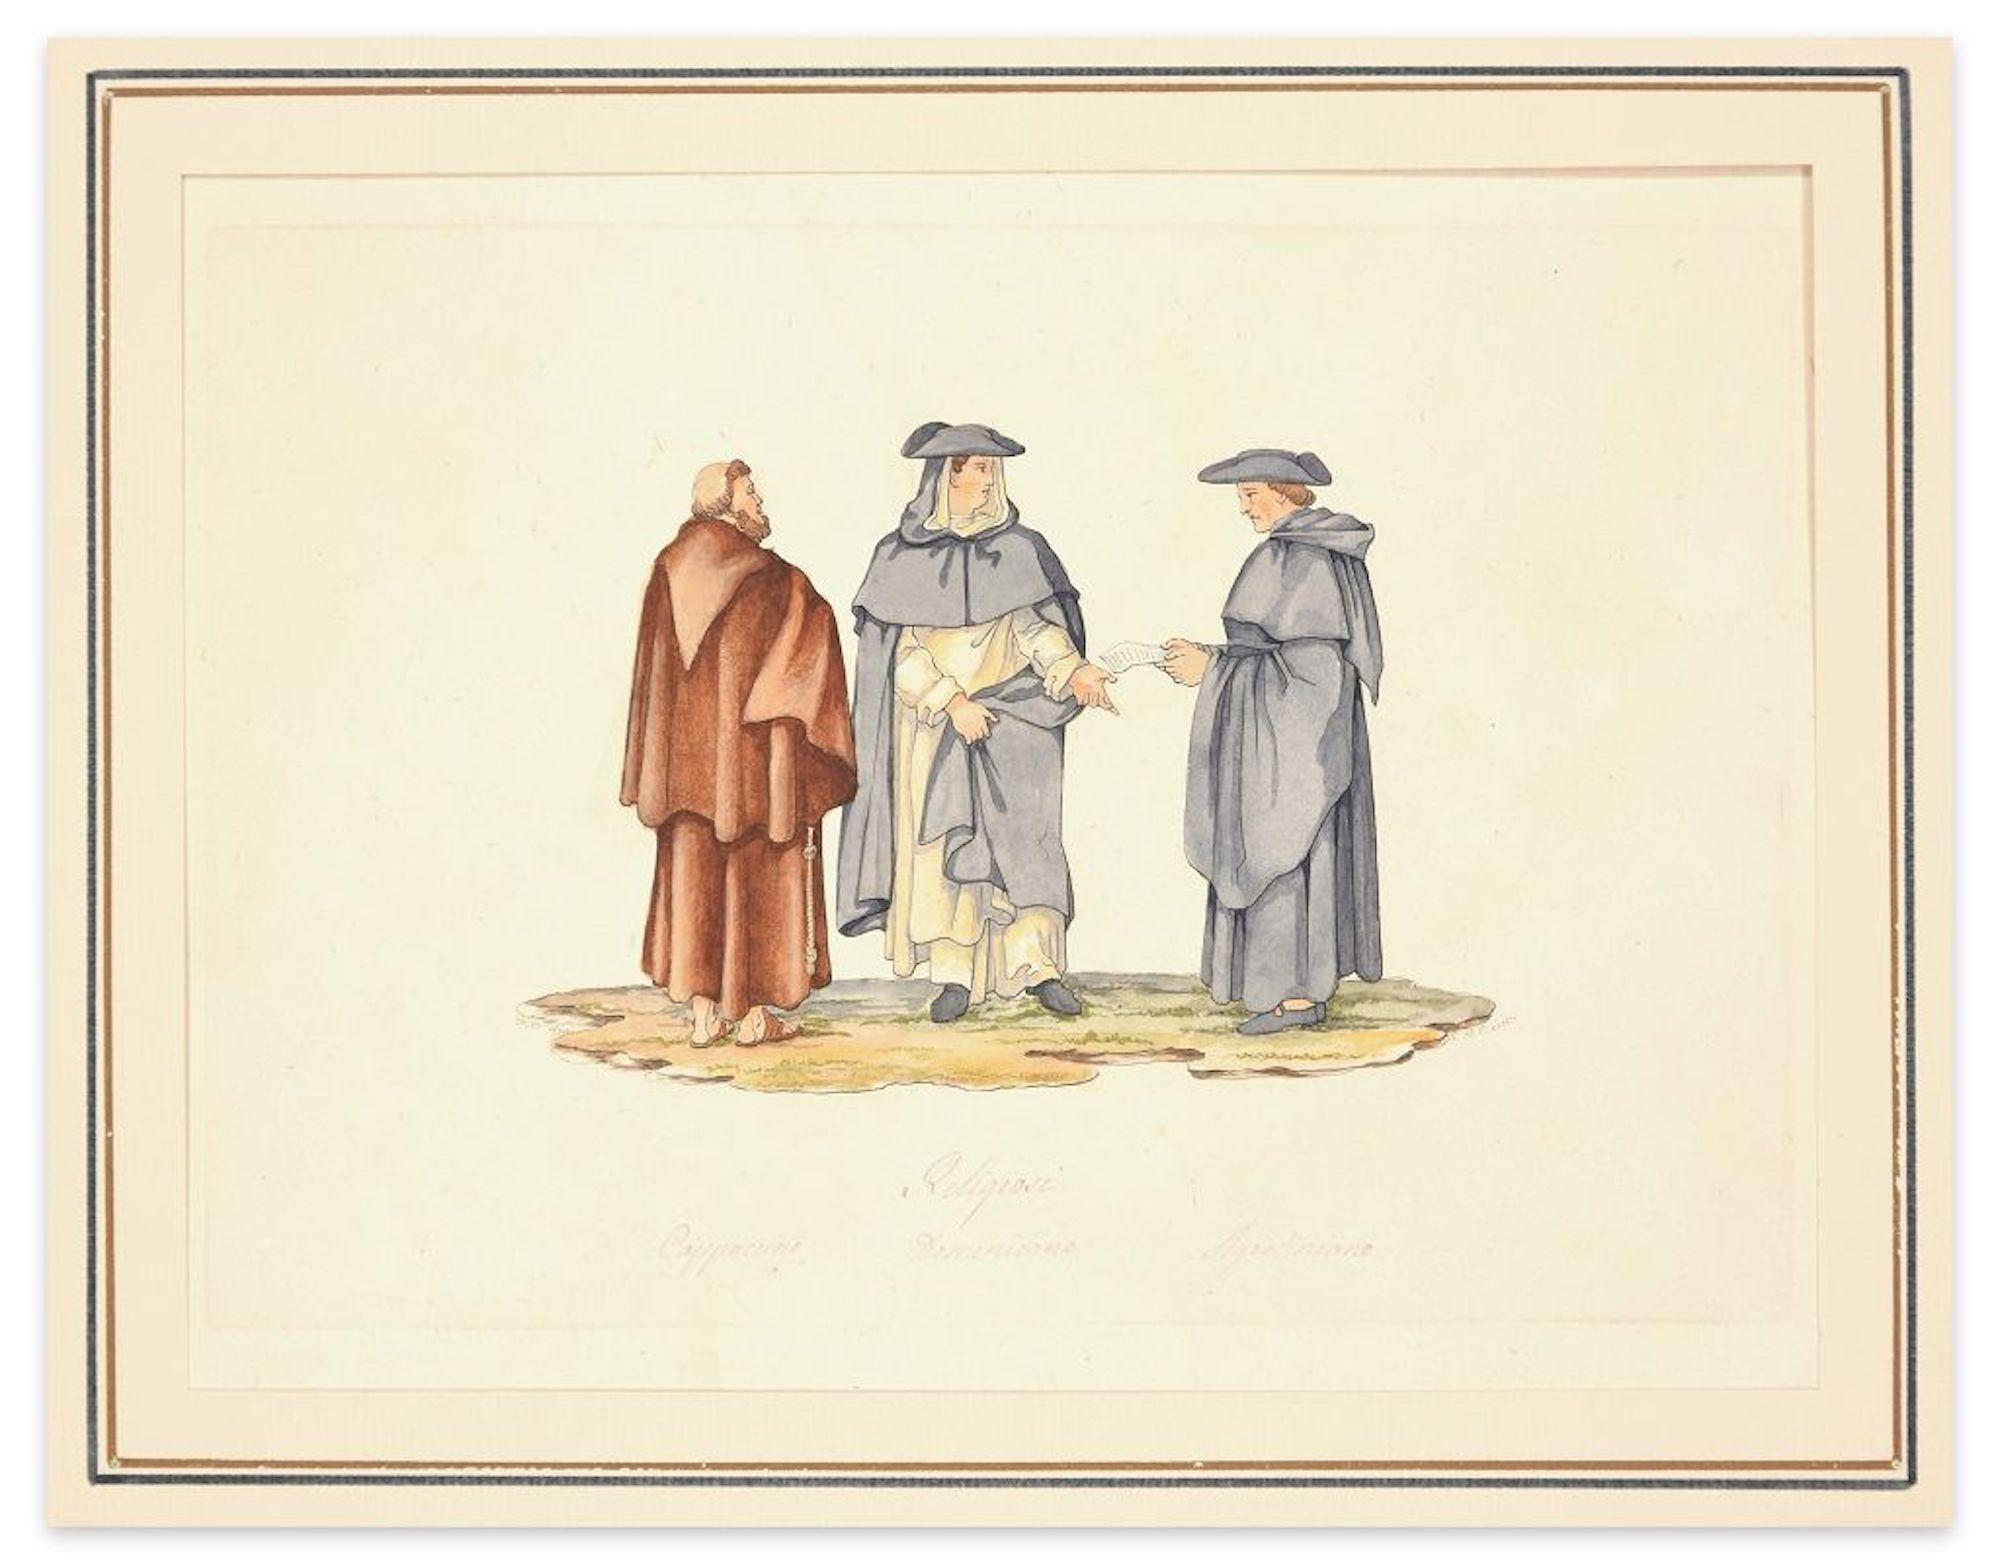 Religious Men - Colored Etching After F. Ferrari by G.B. Cipriani - Print by Filippo Ferrari (After)